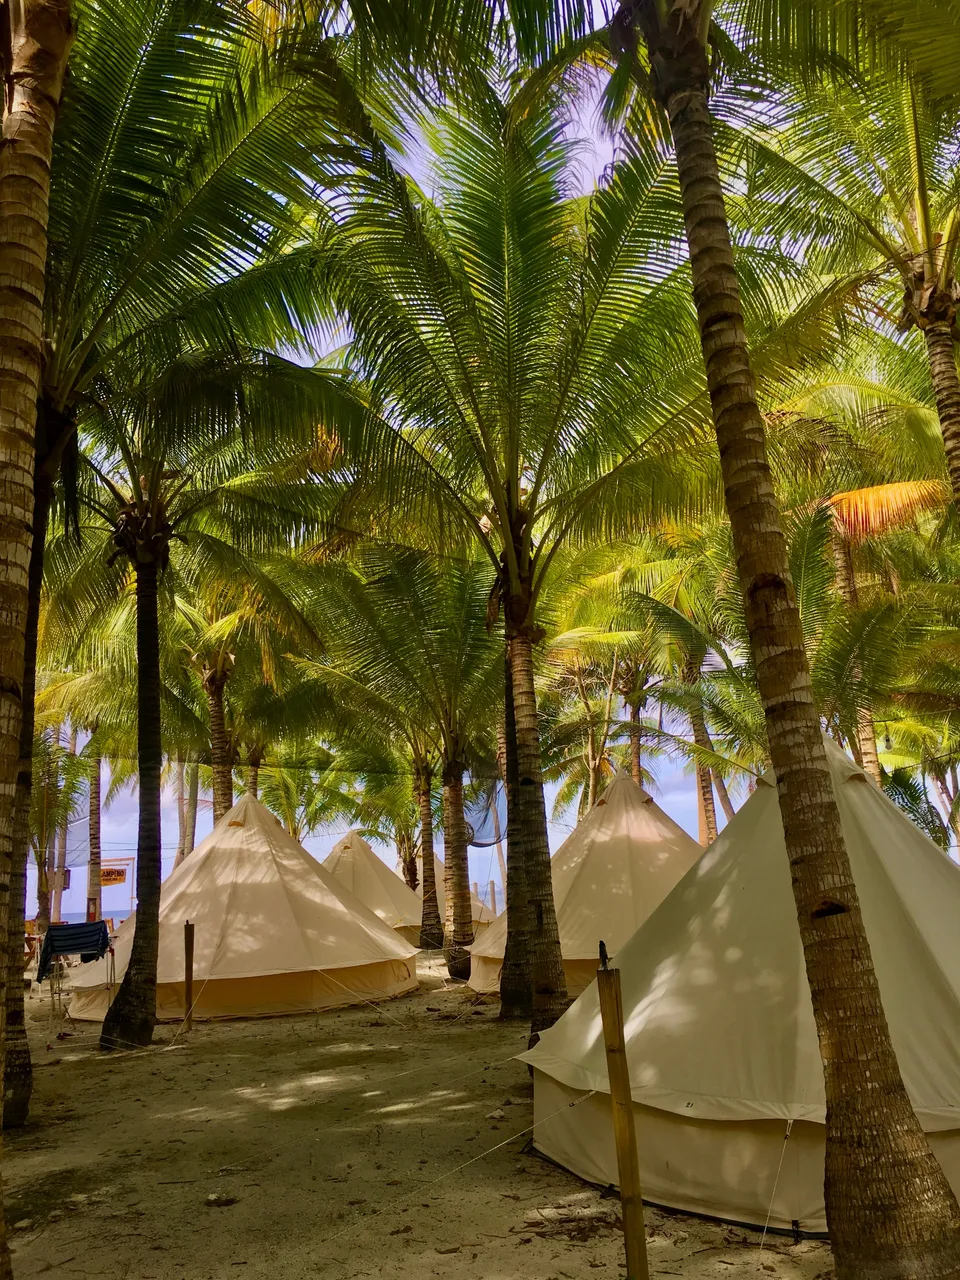 Towering palm trees abound among the glamping tents, creating harmony between  aesthetics and natural beauty